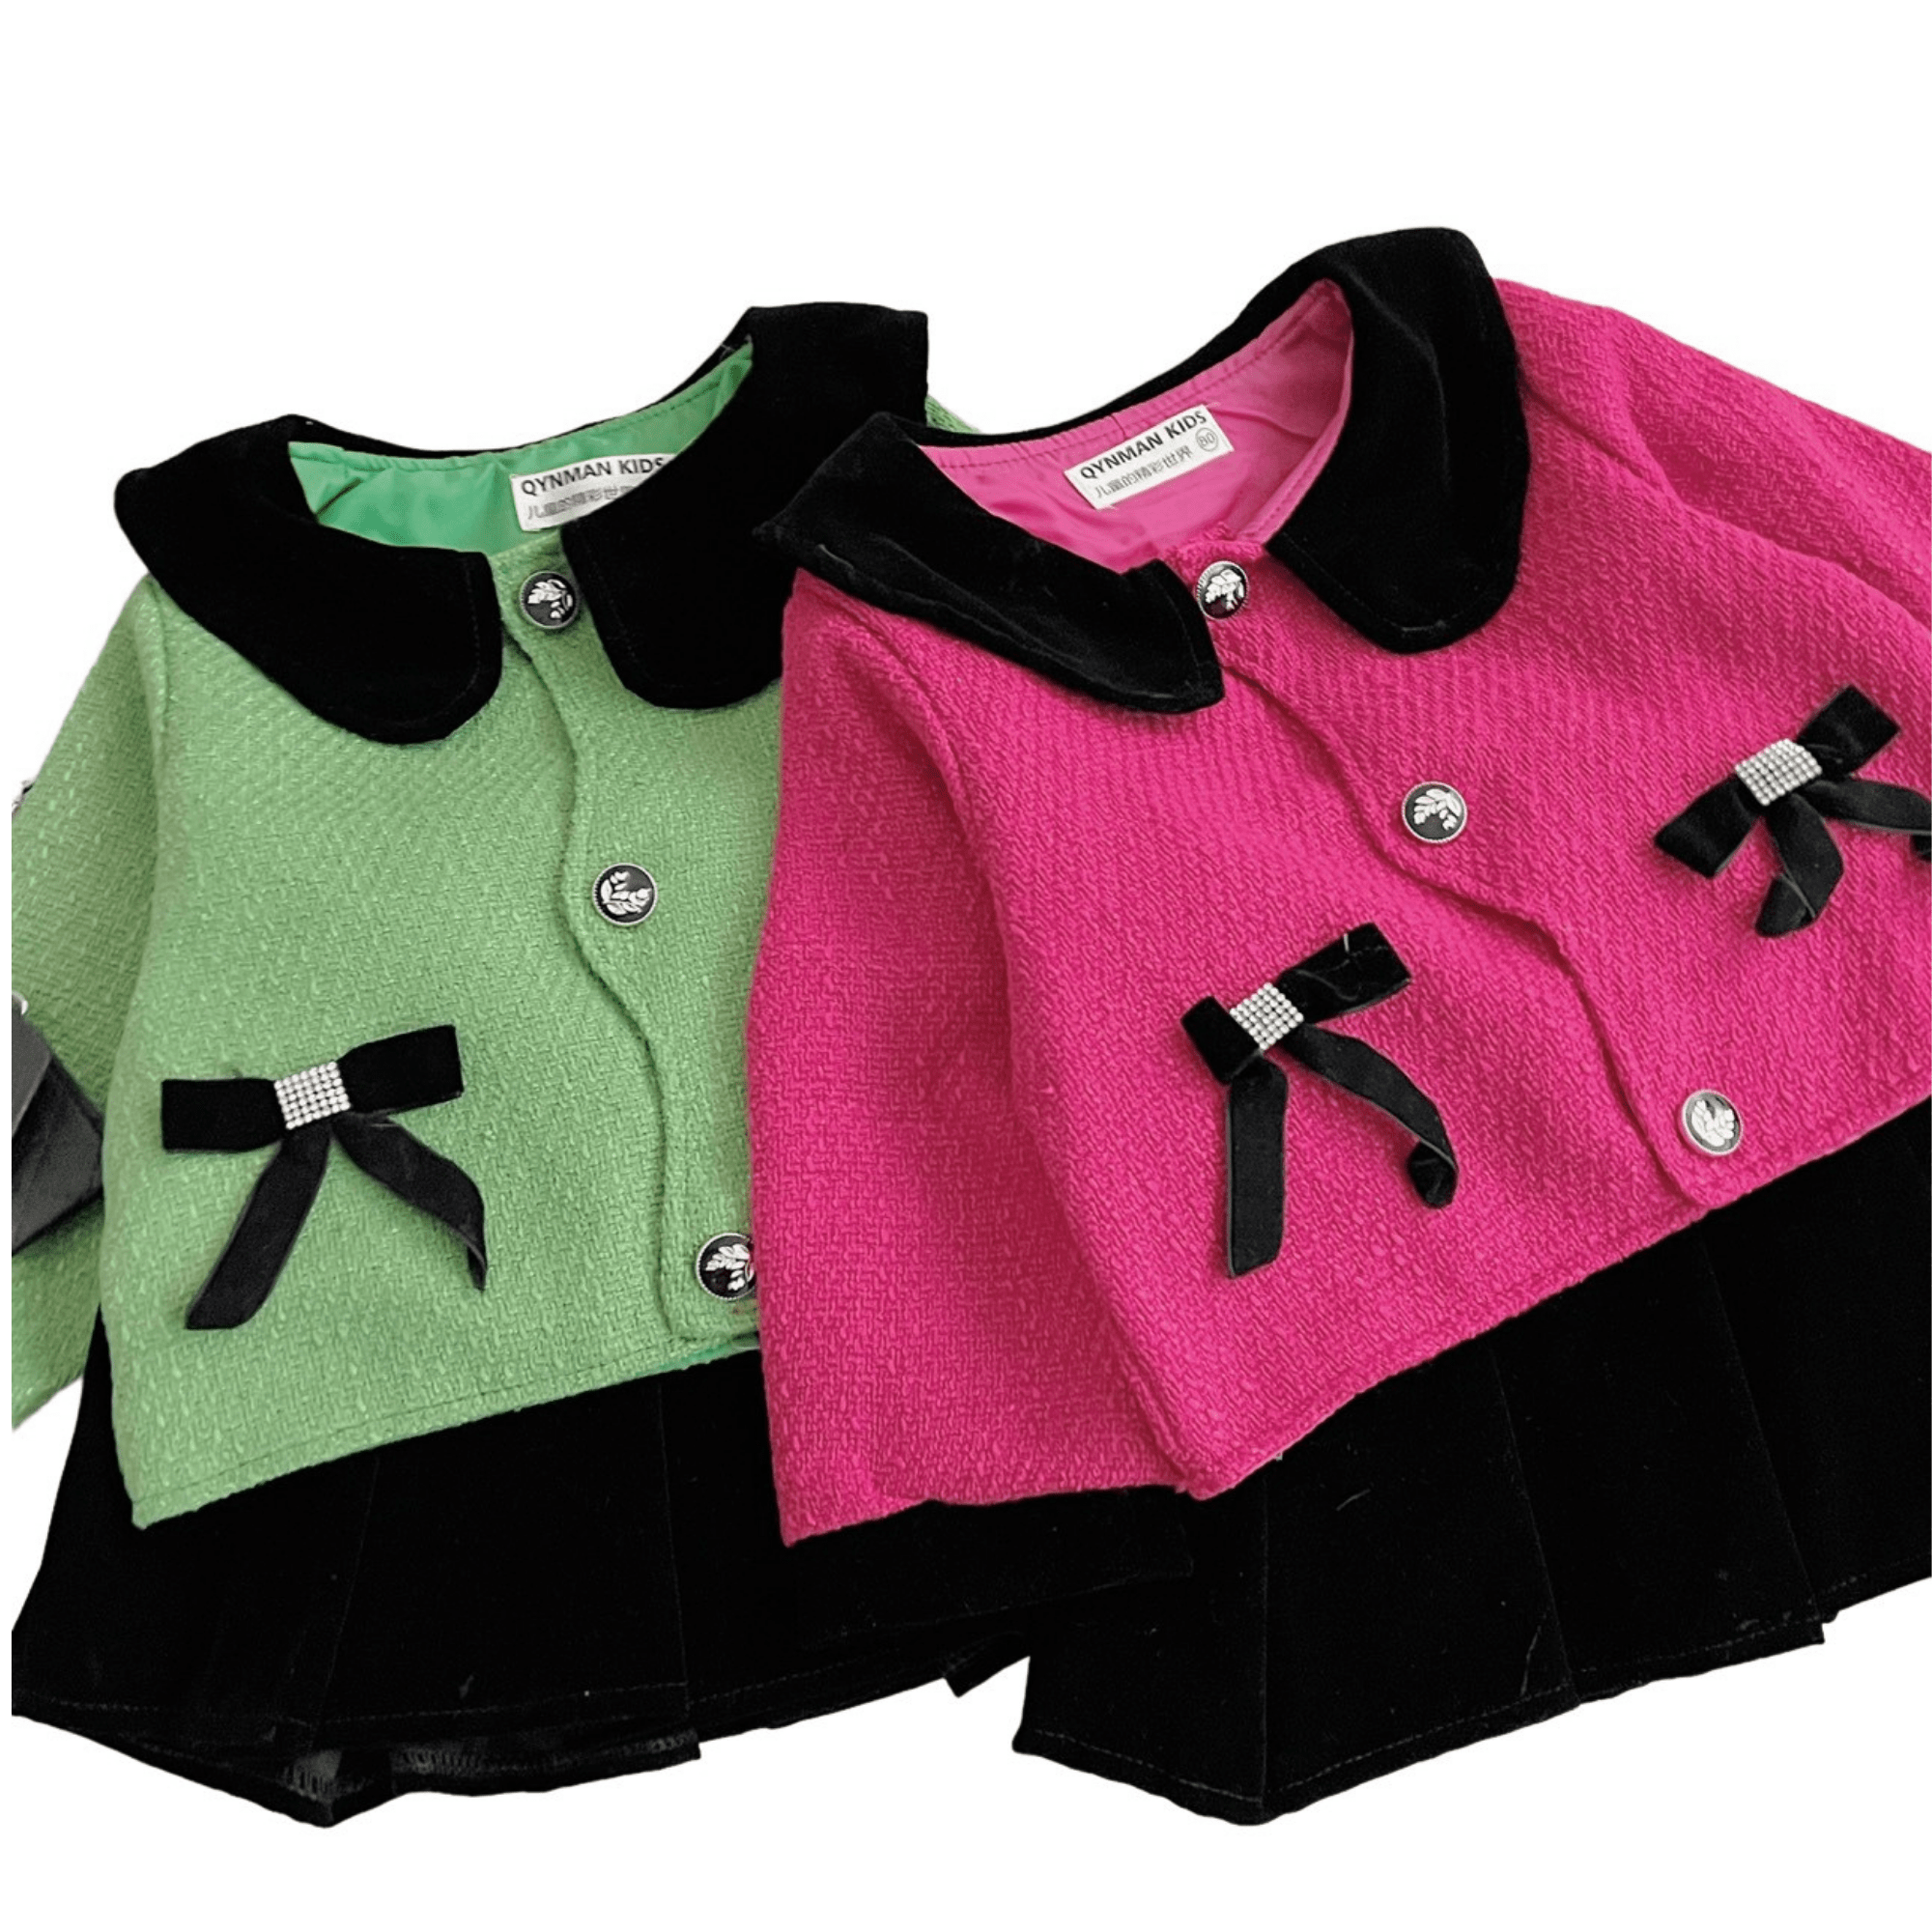 Kids Clothes Girls Factory Price 100% Wool Woolen Set Casual Each One In Opp Bag From Vietnam Manufacturer 7